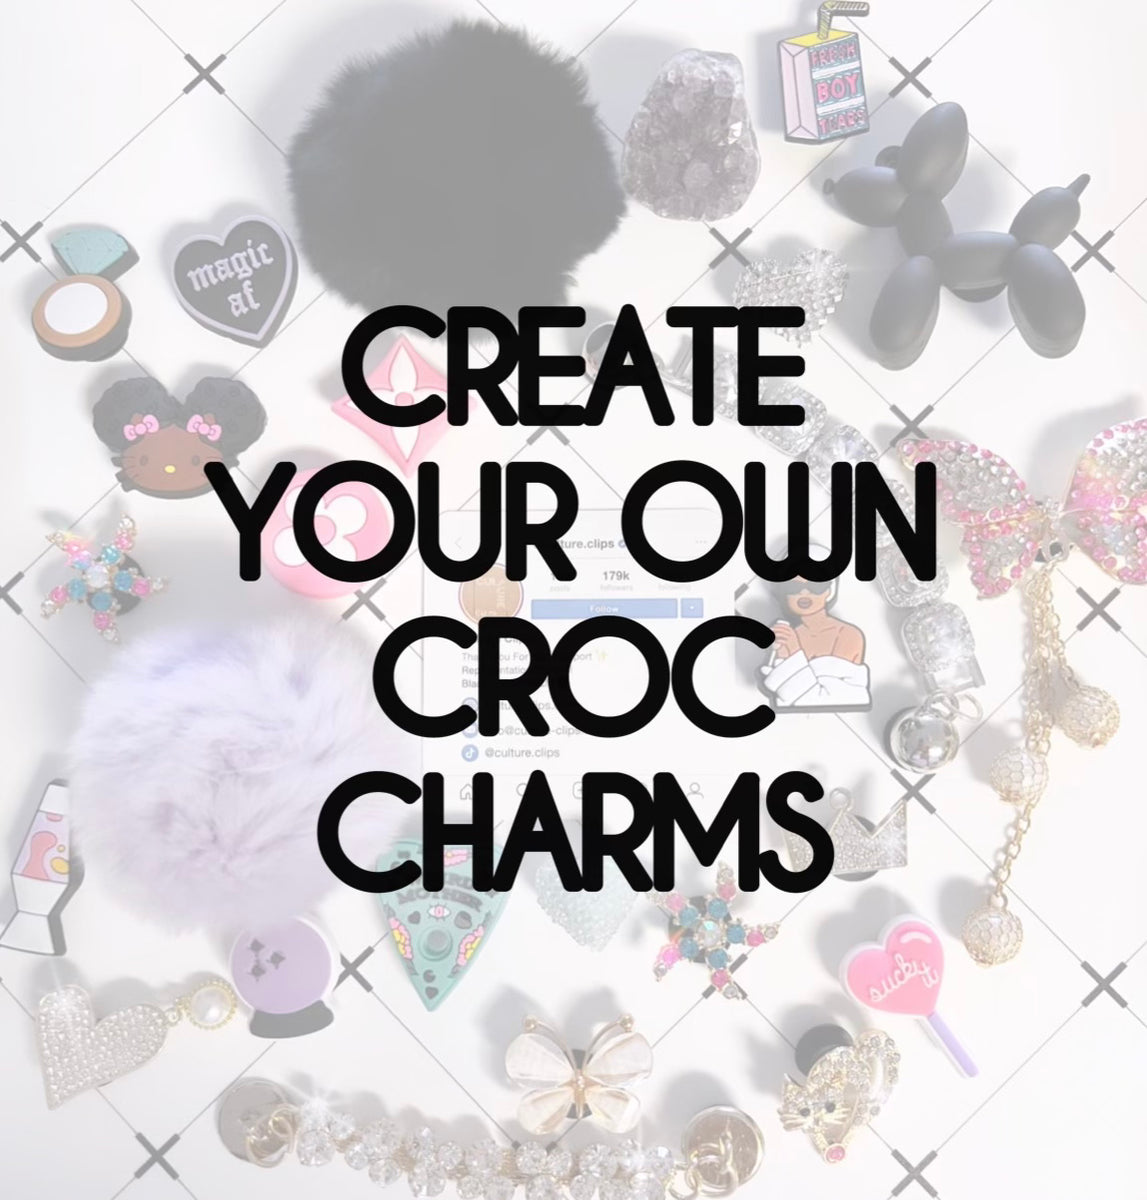 Designer Croc Charms on X: Check out the PVC Croc Charms